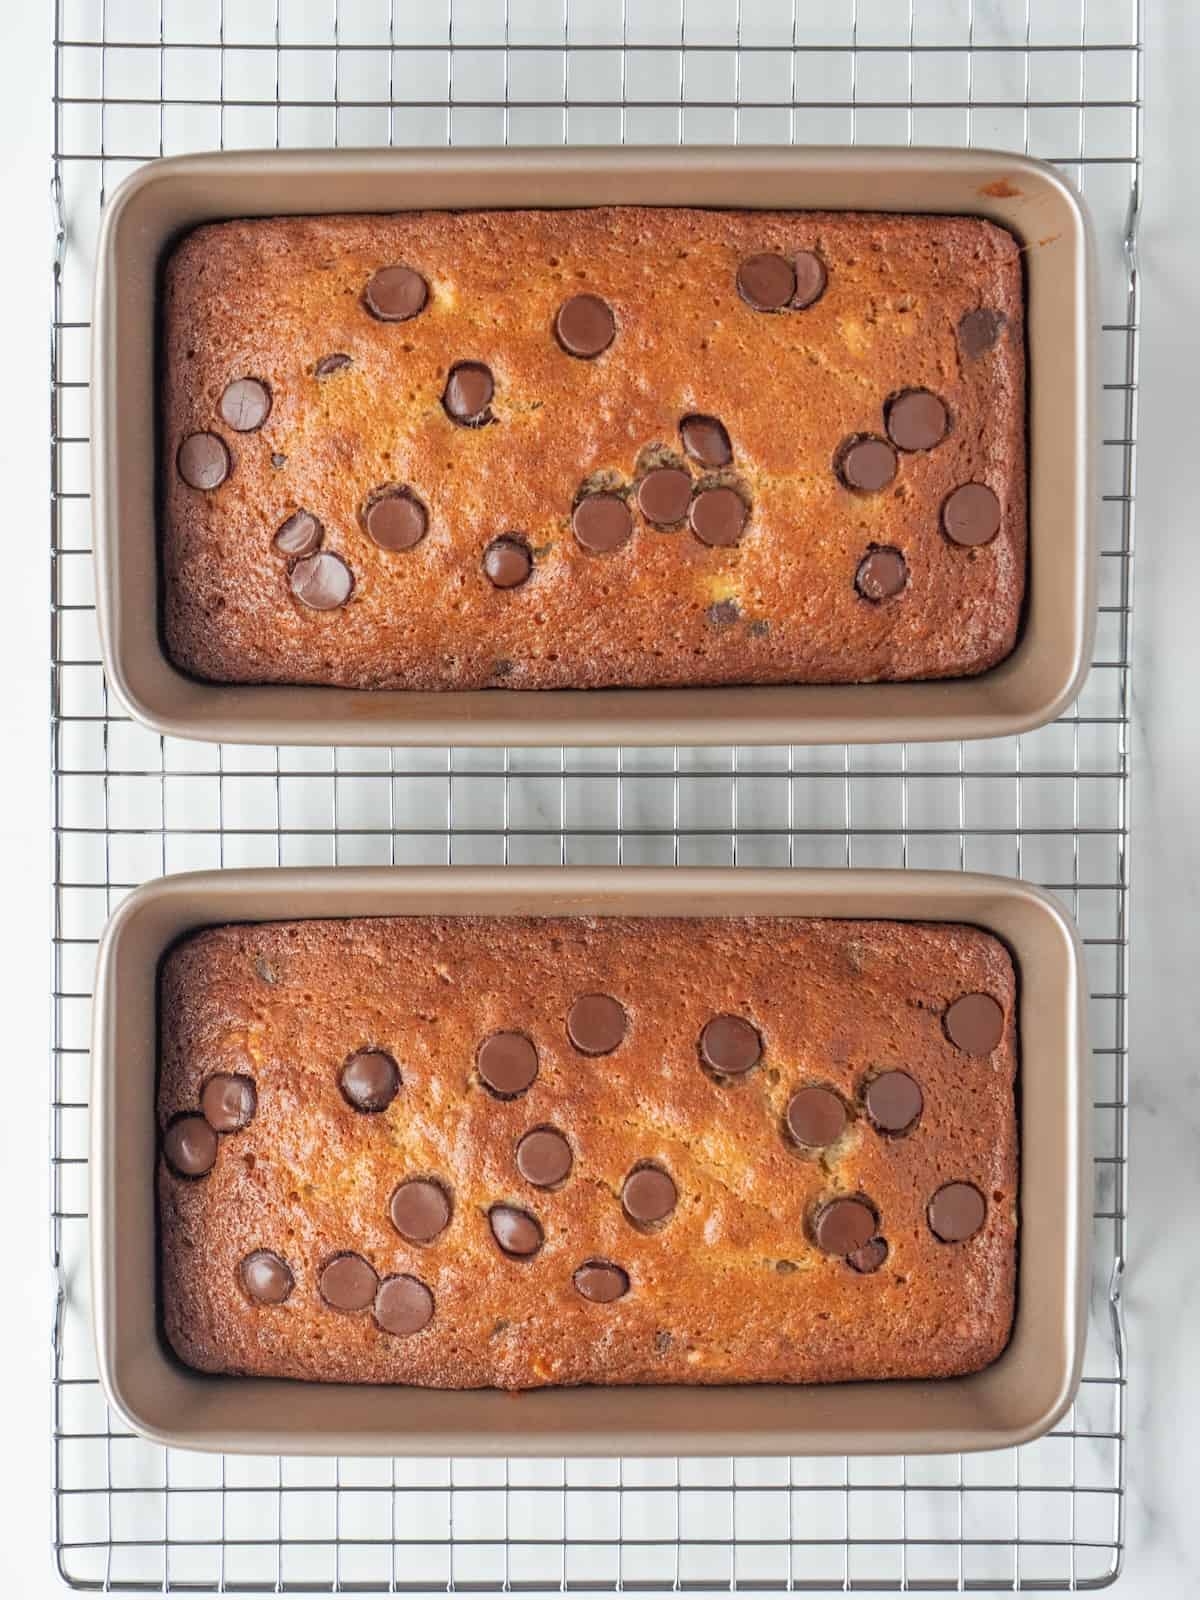 Two 9x5 loaf pans of chocolate chip banana bread, baked and fresh out of the oven placed on a wire rack. 